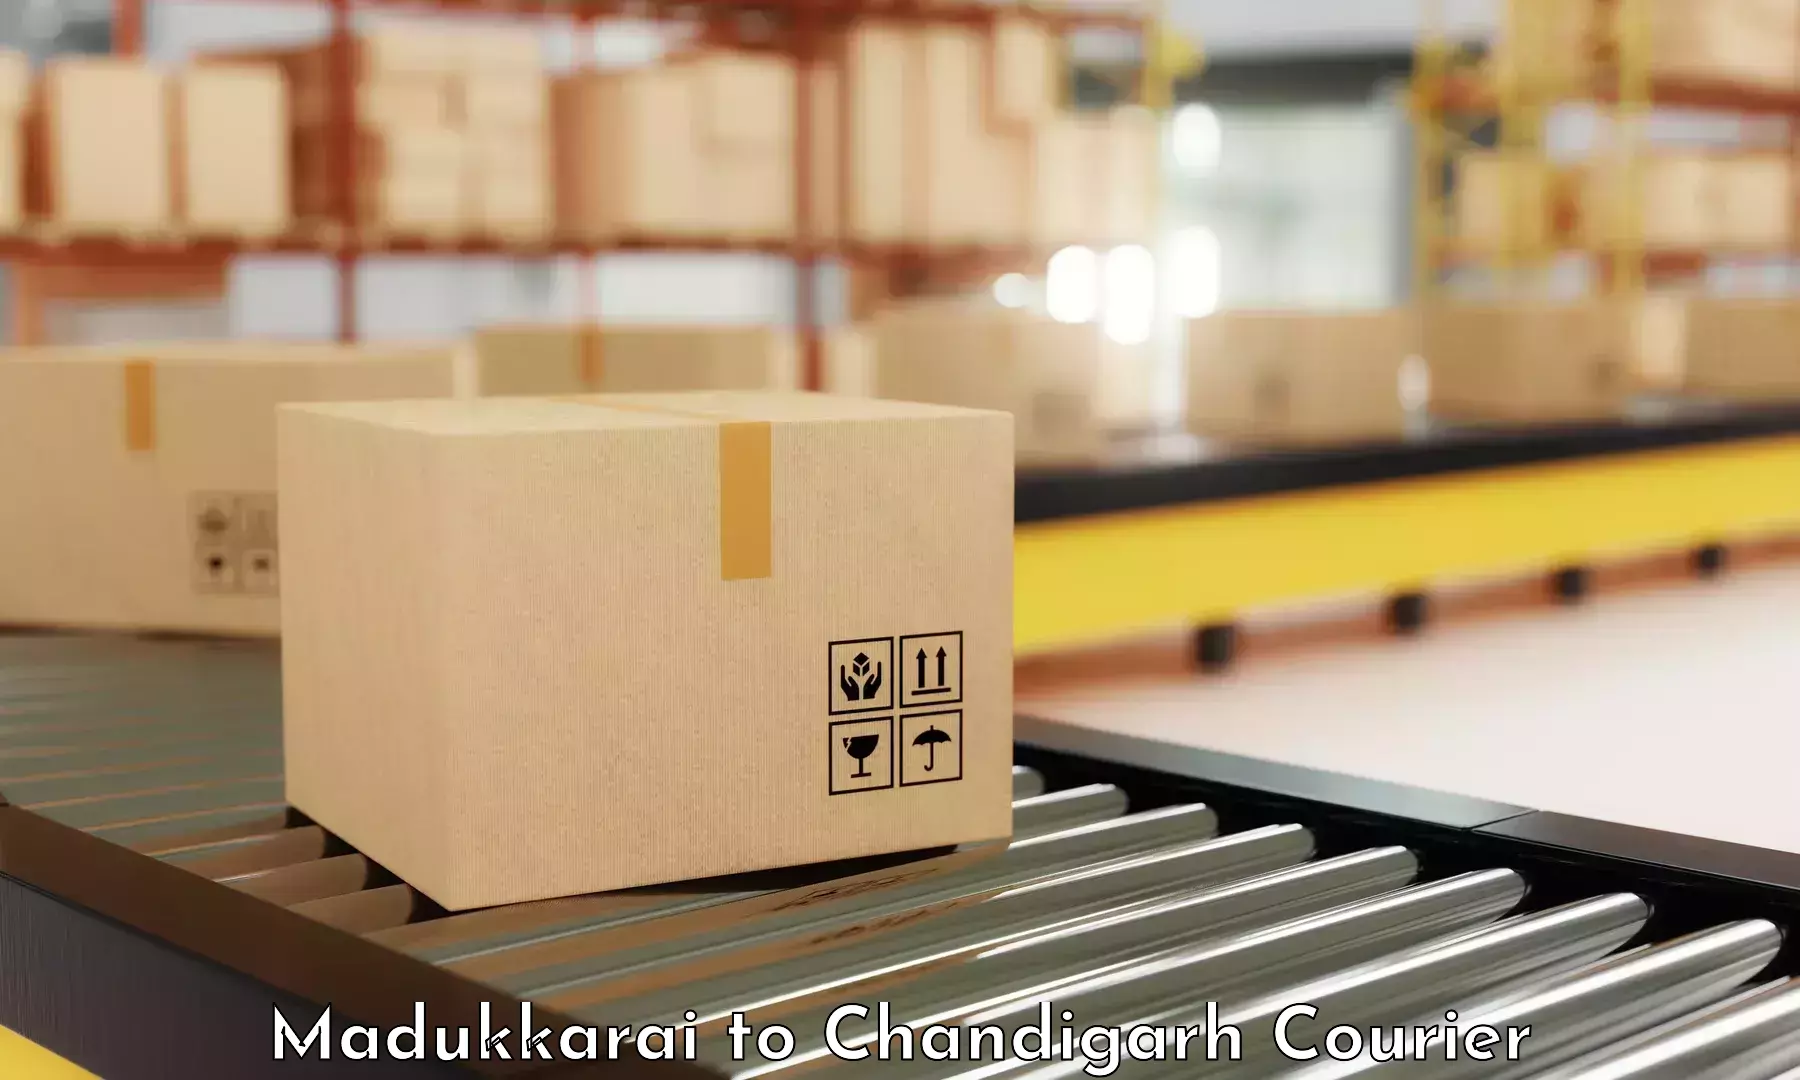 Round-the-clock parcel delivery Madukkarai to Chandigarh